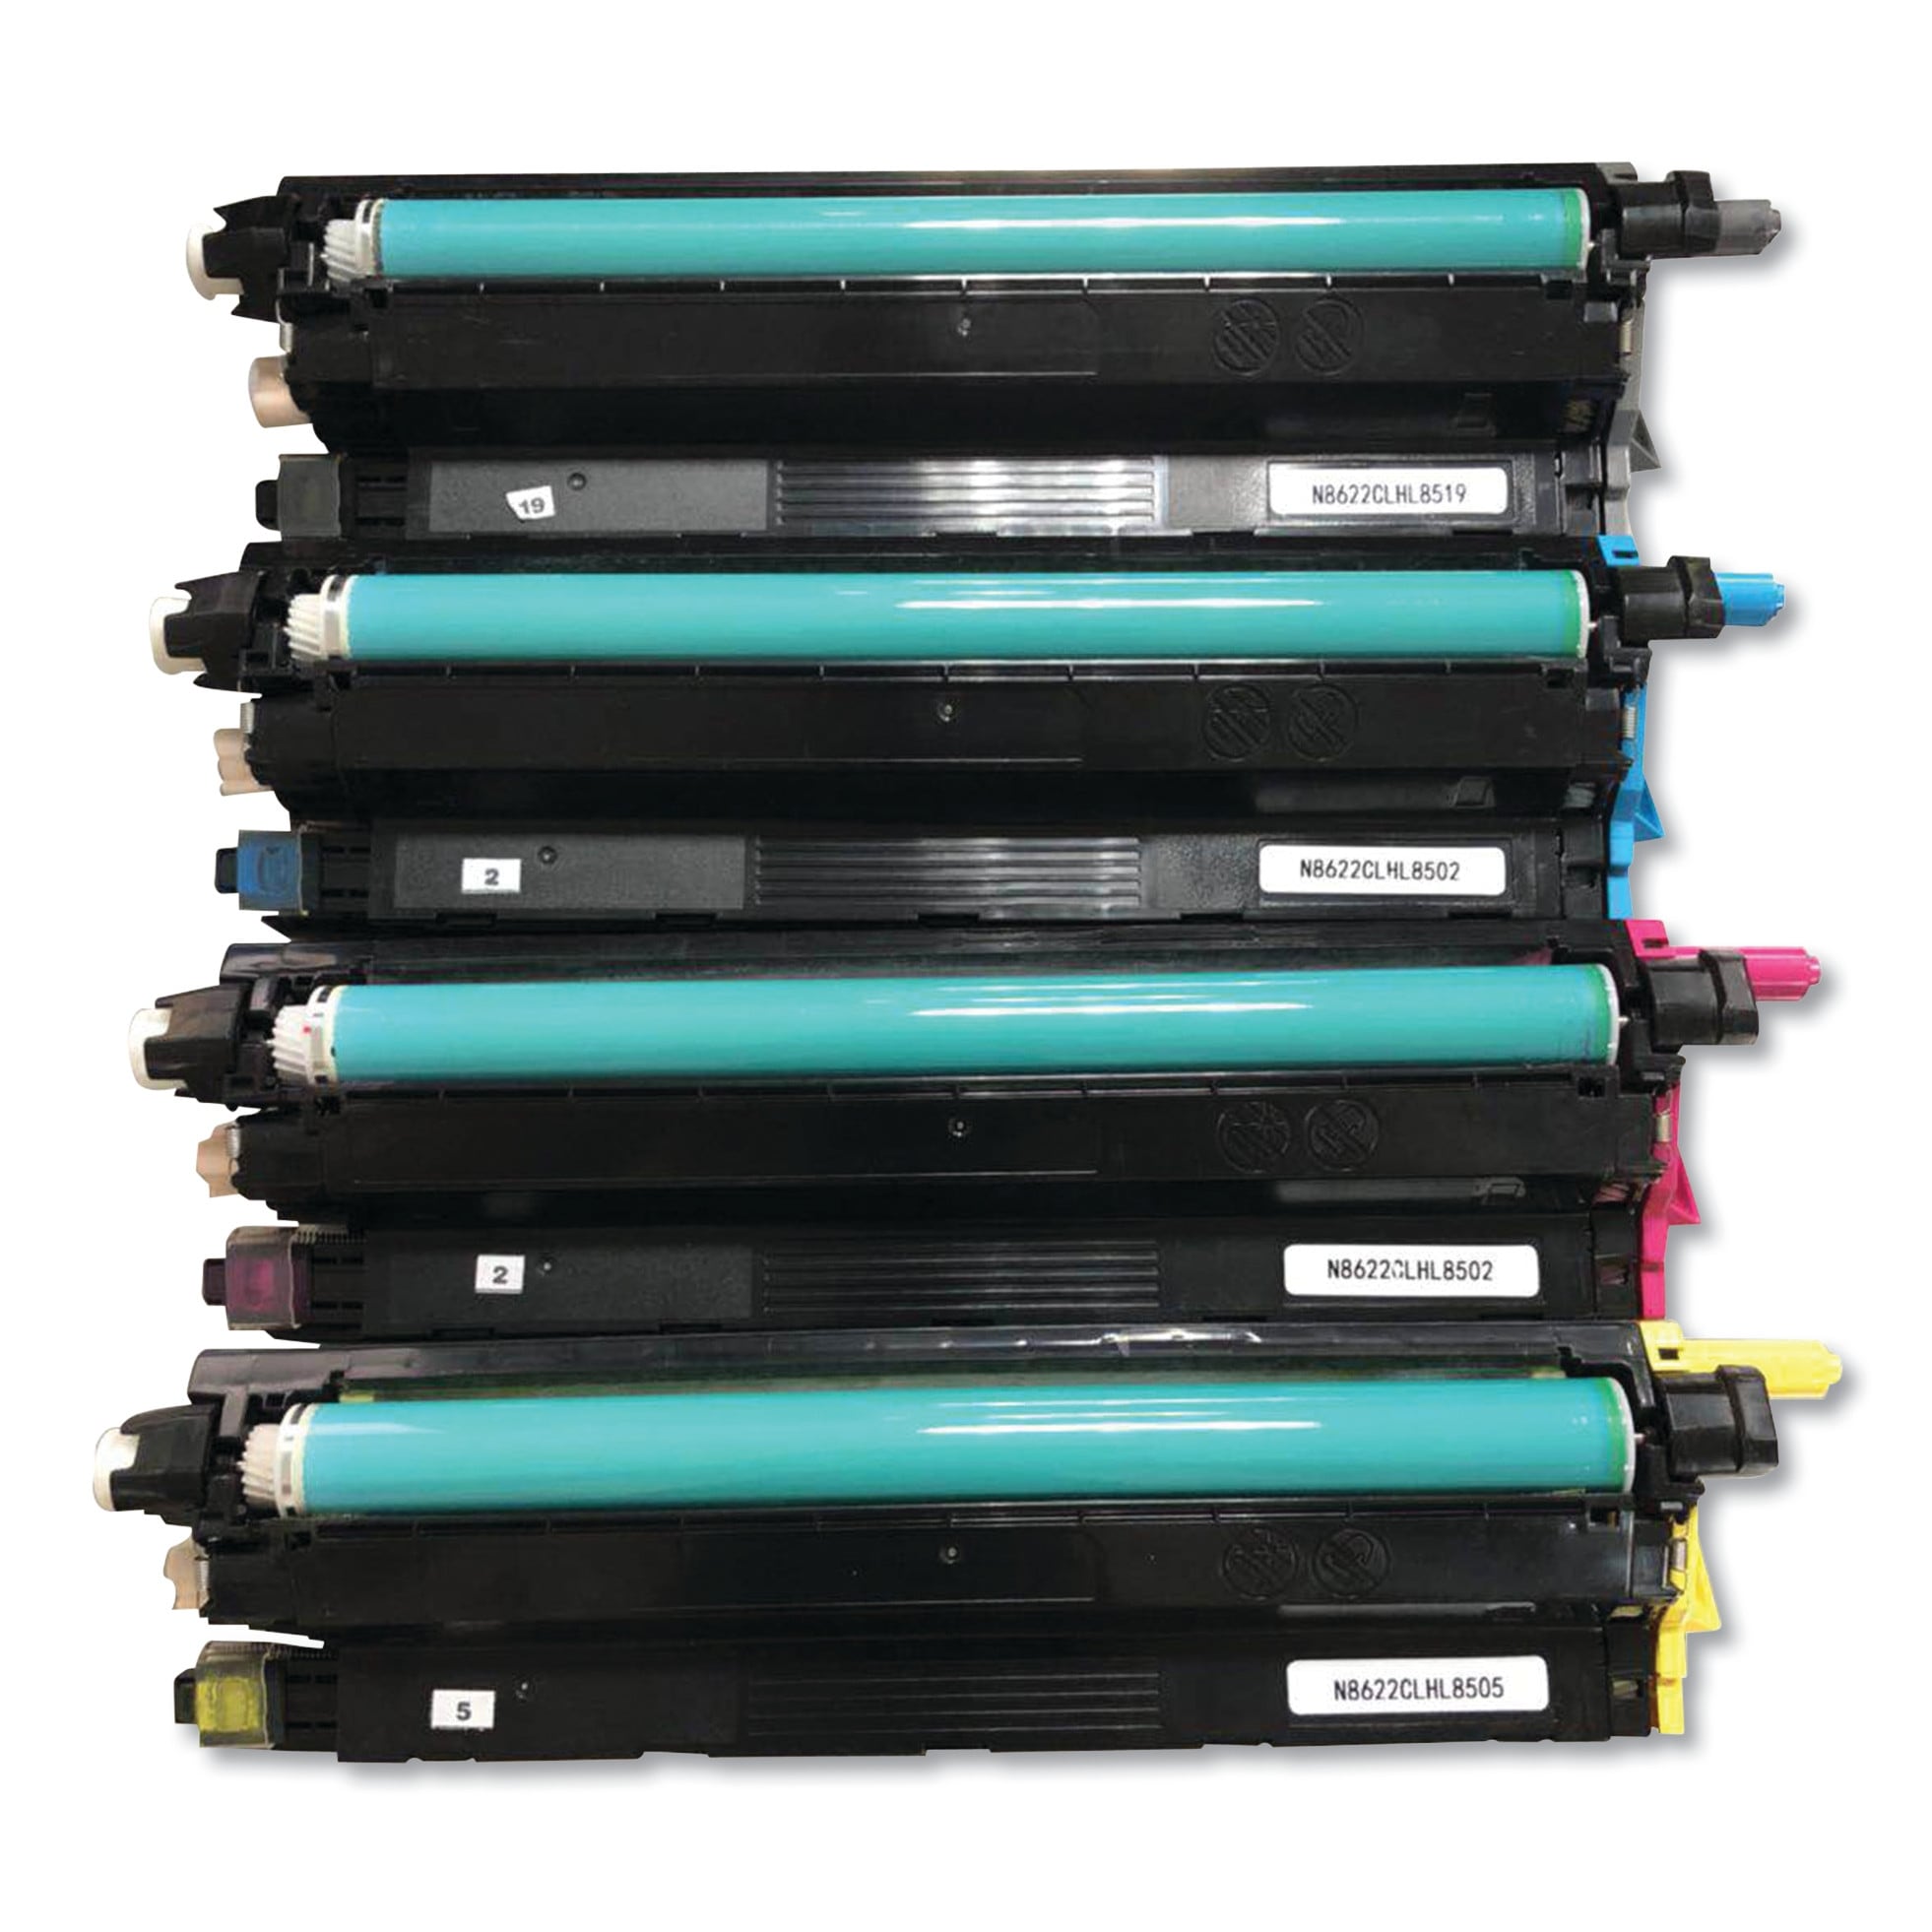 Remanufactured Black/Cyan/Yellow Drum Unit, Replacement for 331-8434 - Black